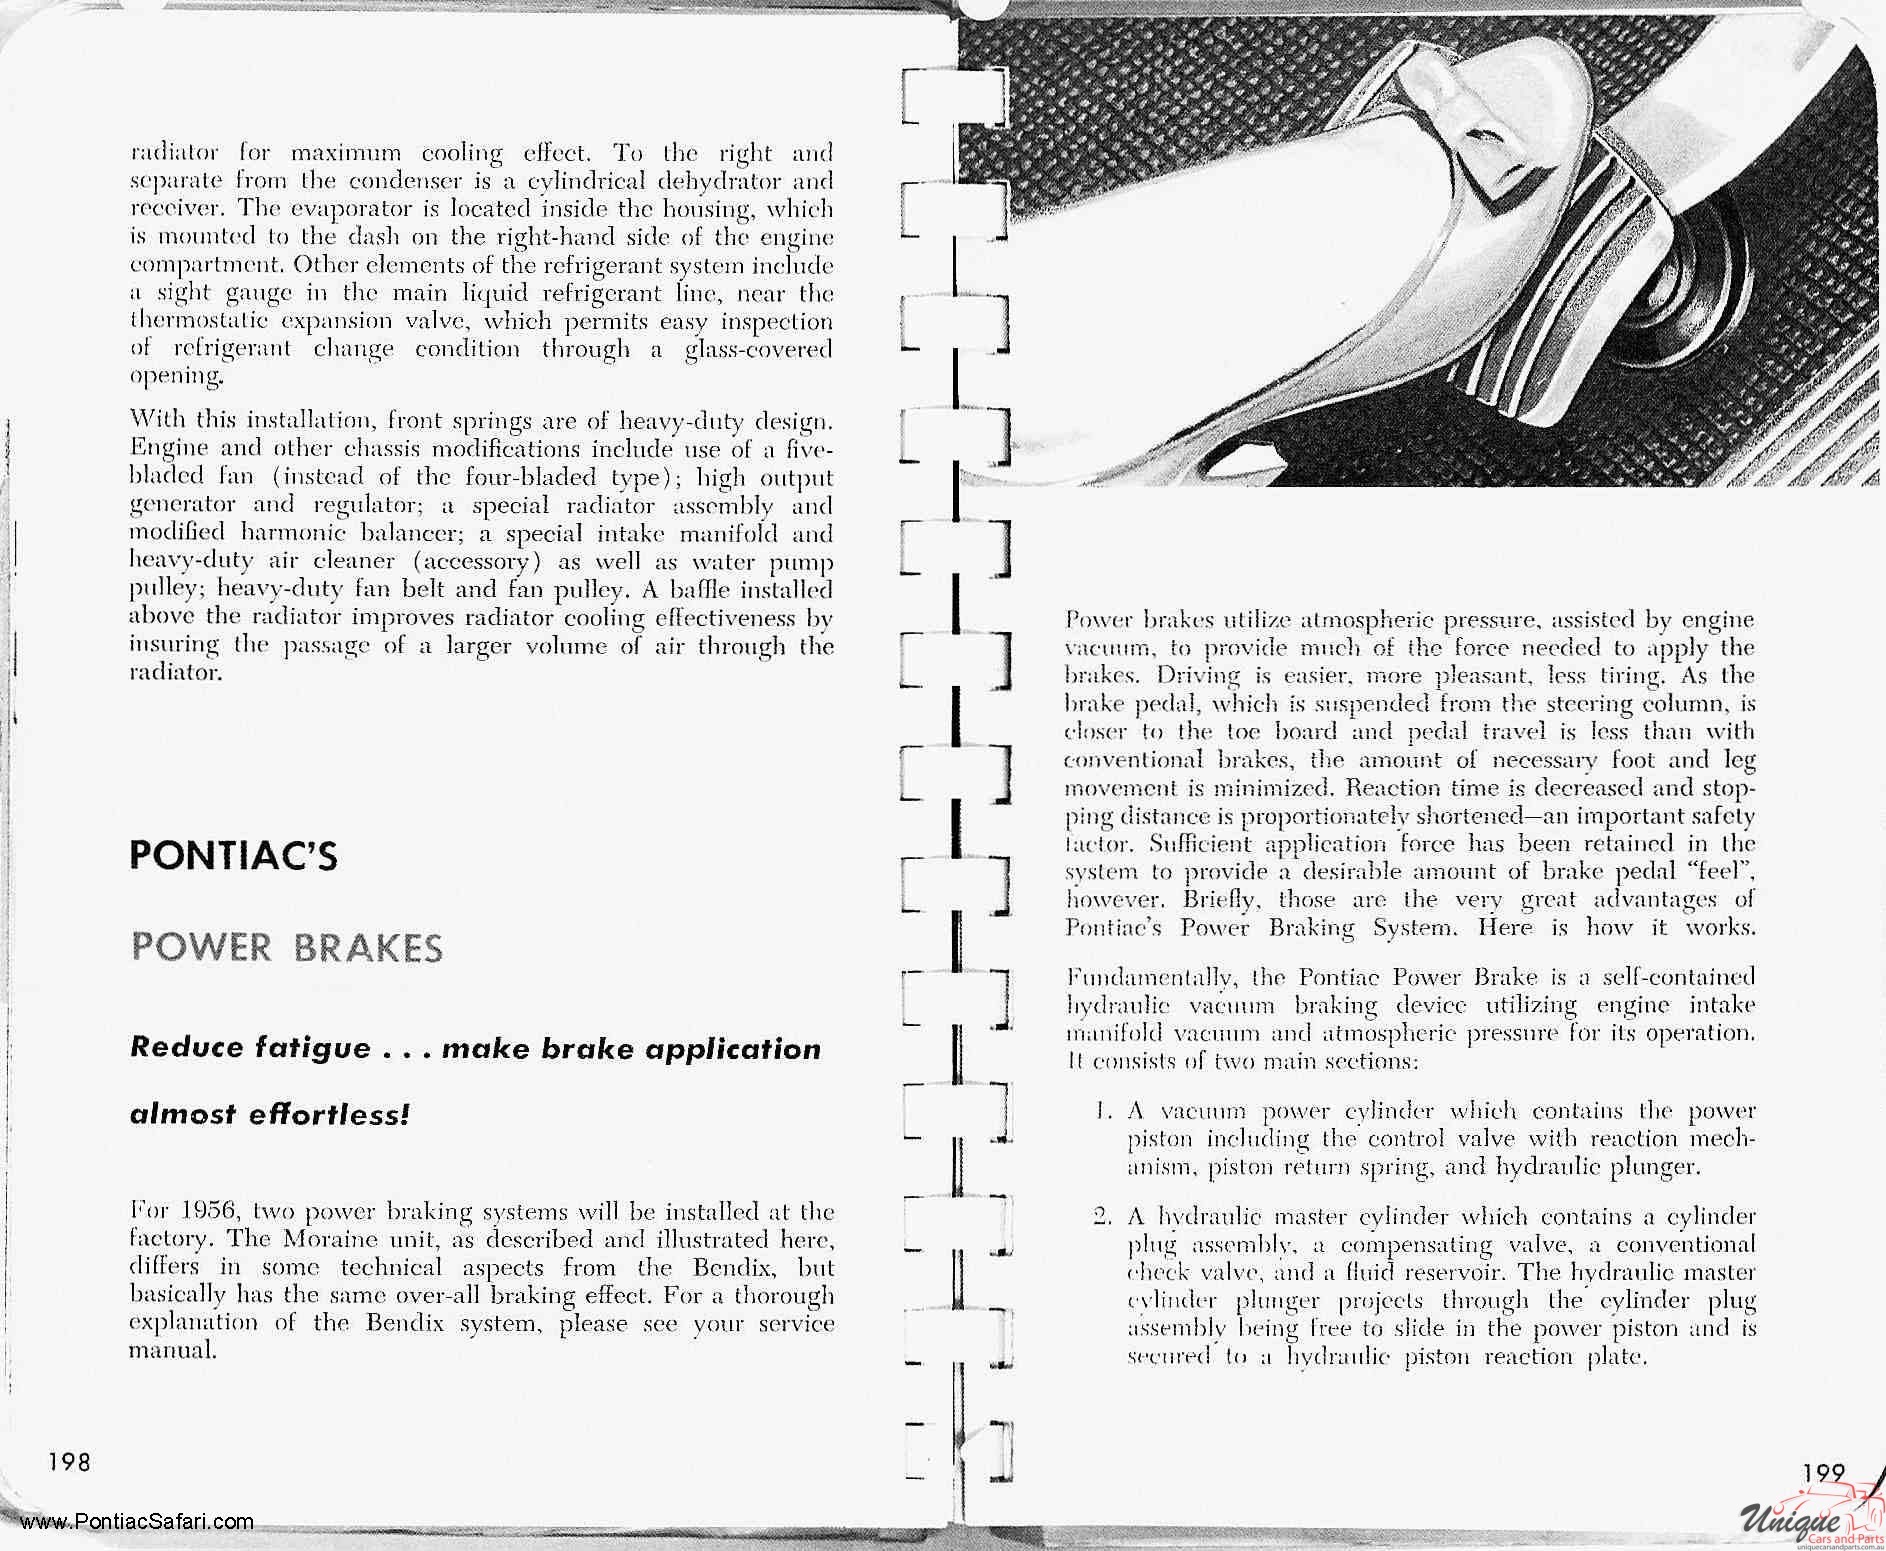 1956 Pontiac Facts Book Page 83